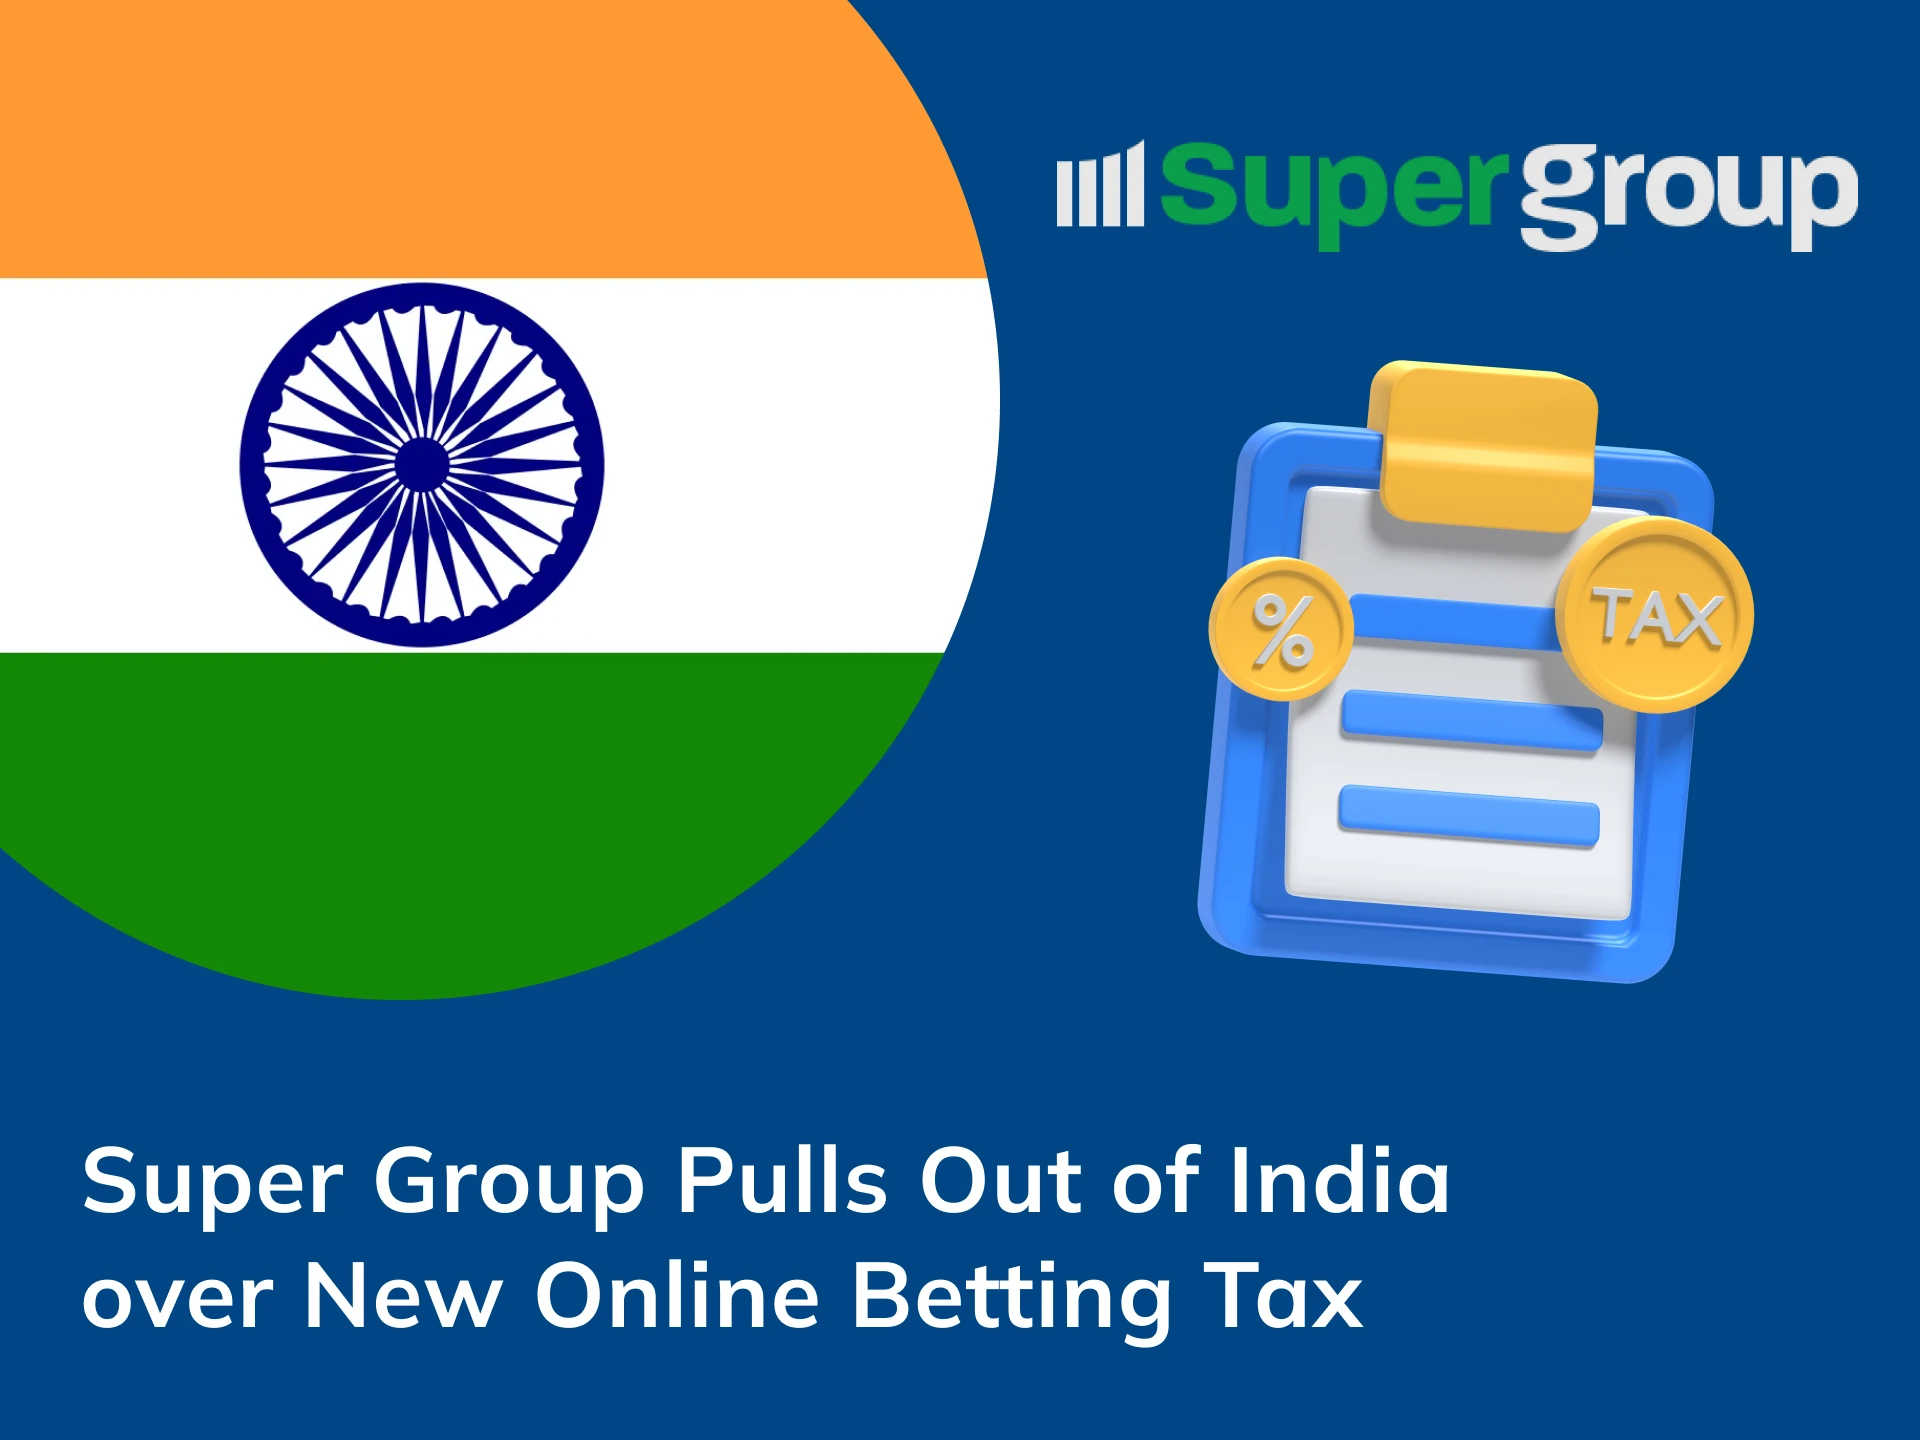 Due to the new tax on online betting, Betway Super Group left the Indian market in protest.